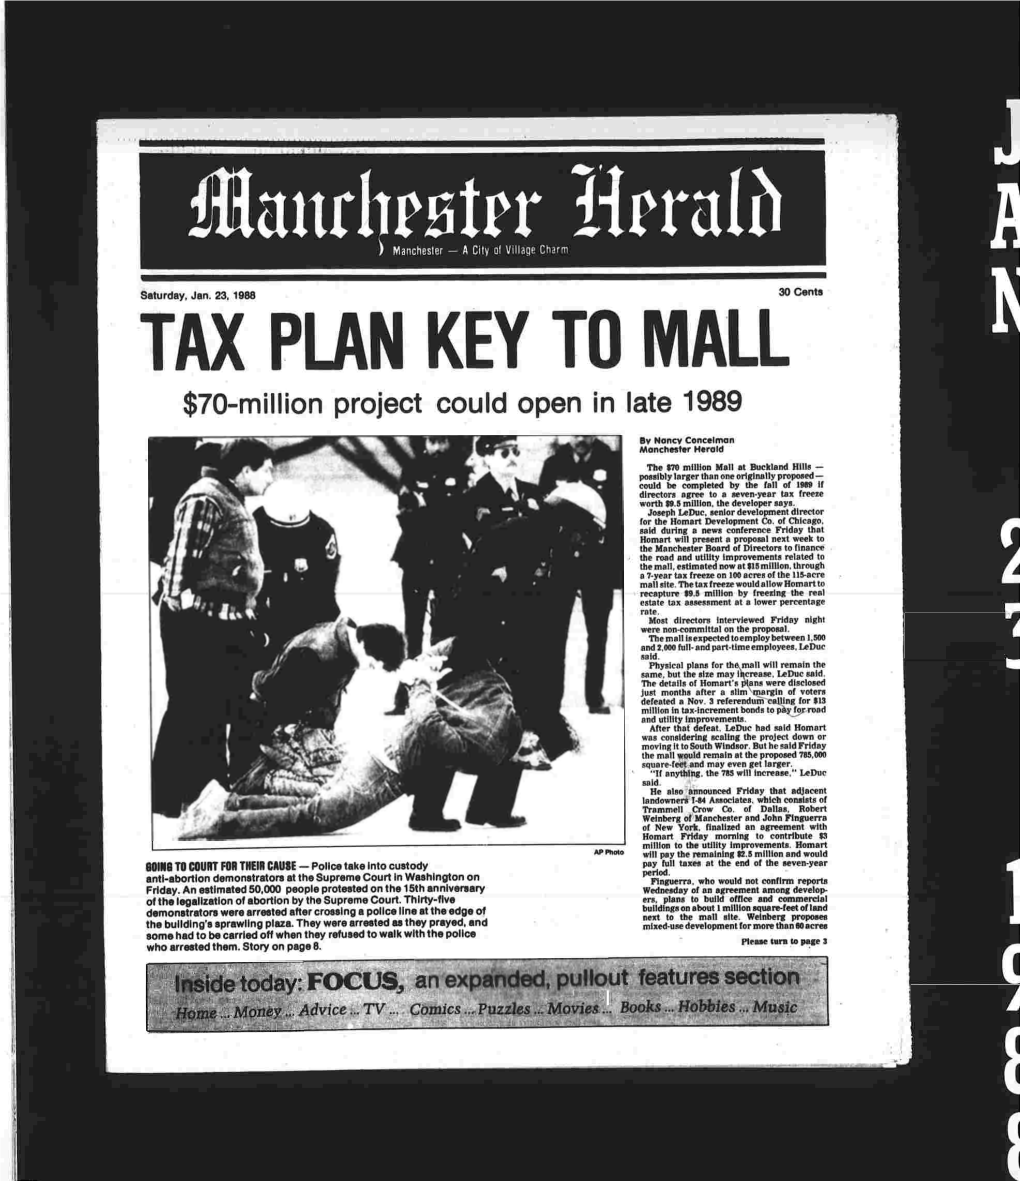 TAX PLAN KEY to MALL $70-Million Project Could Open in Late 1989